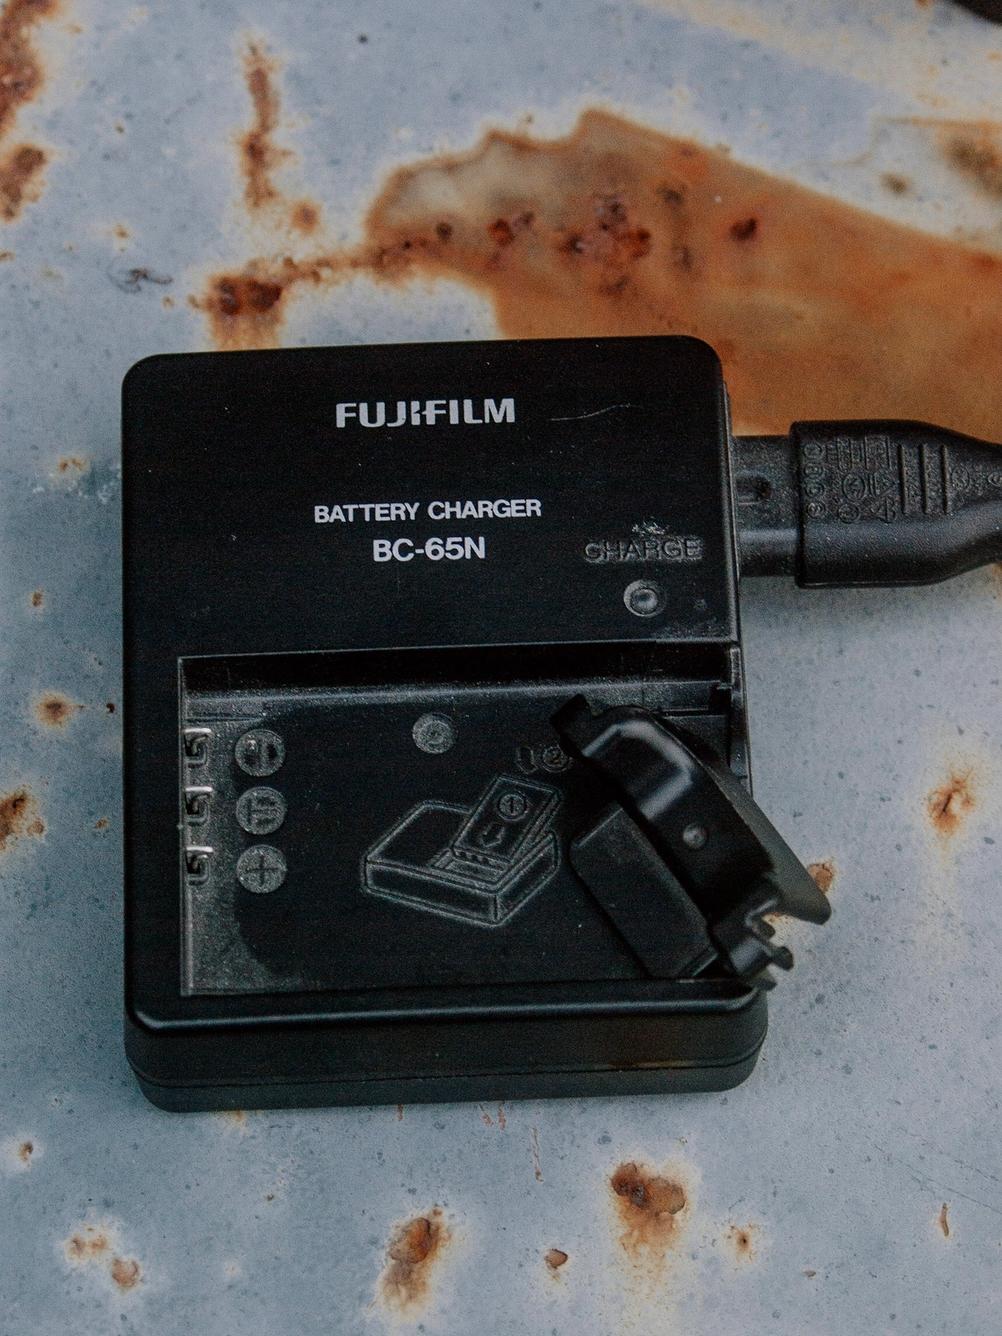 Photo of Fujifilm X100 battery charger.